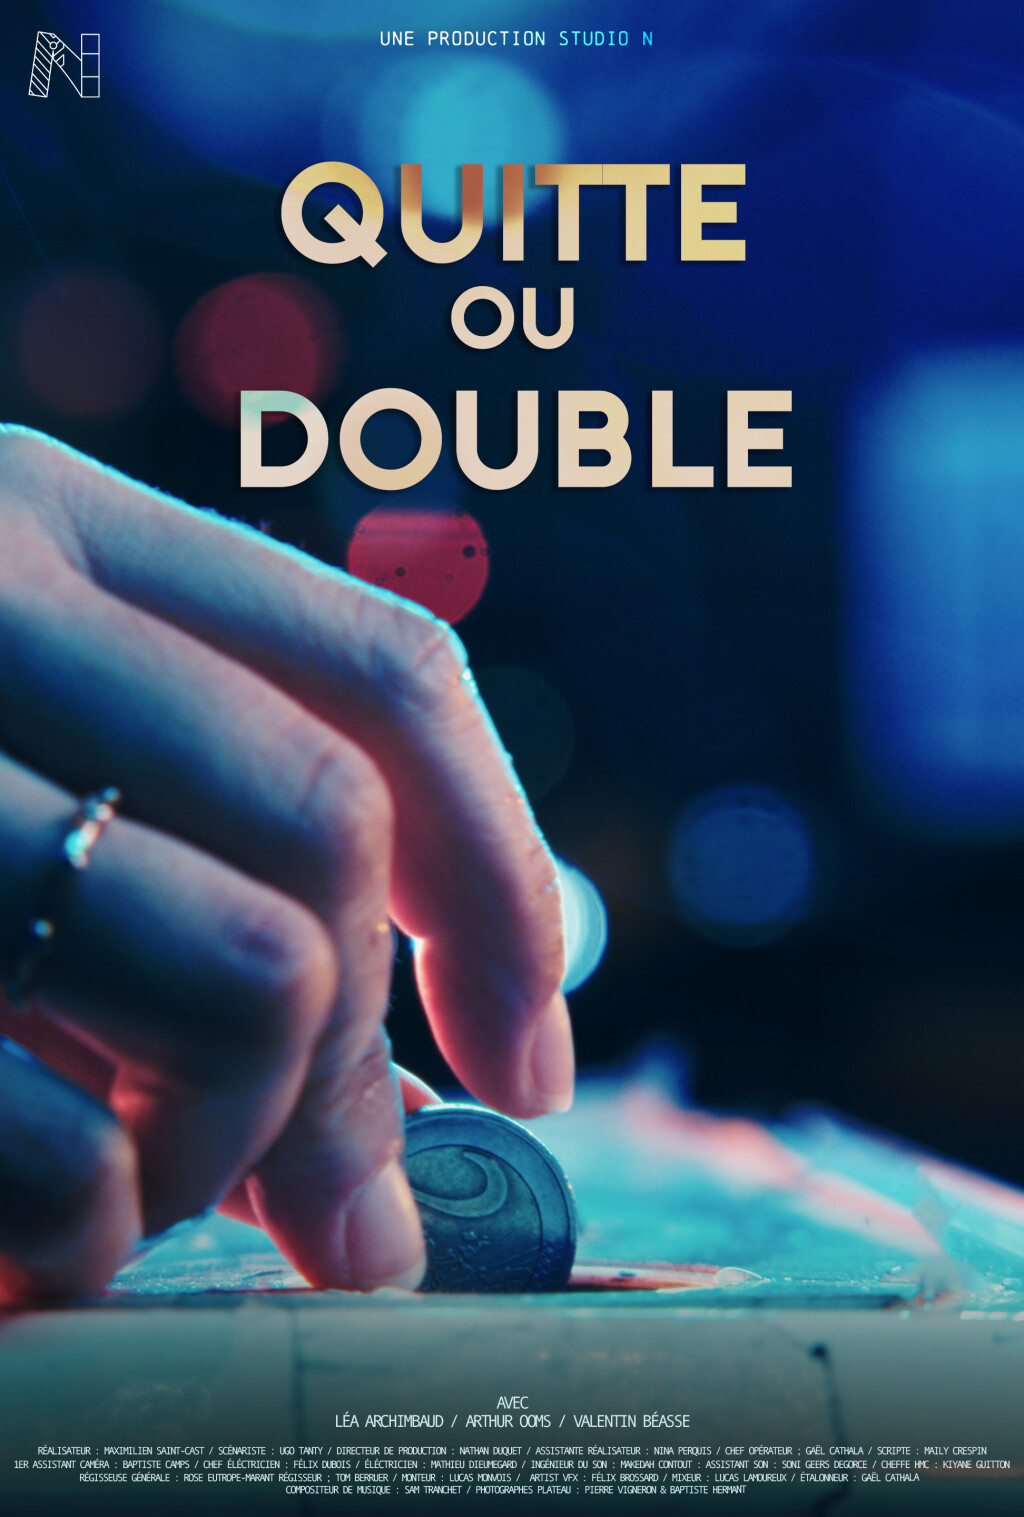 Filmposter for Quitte ou double